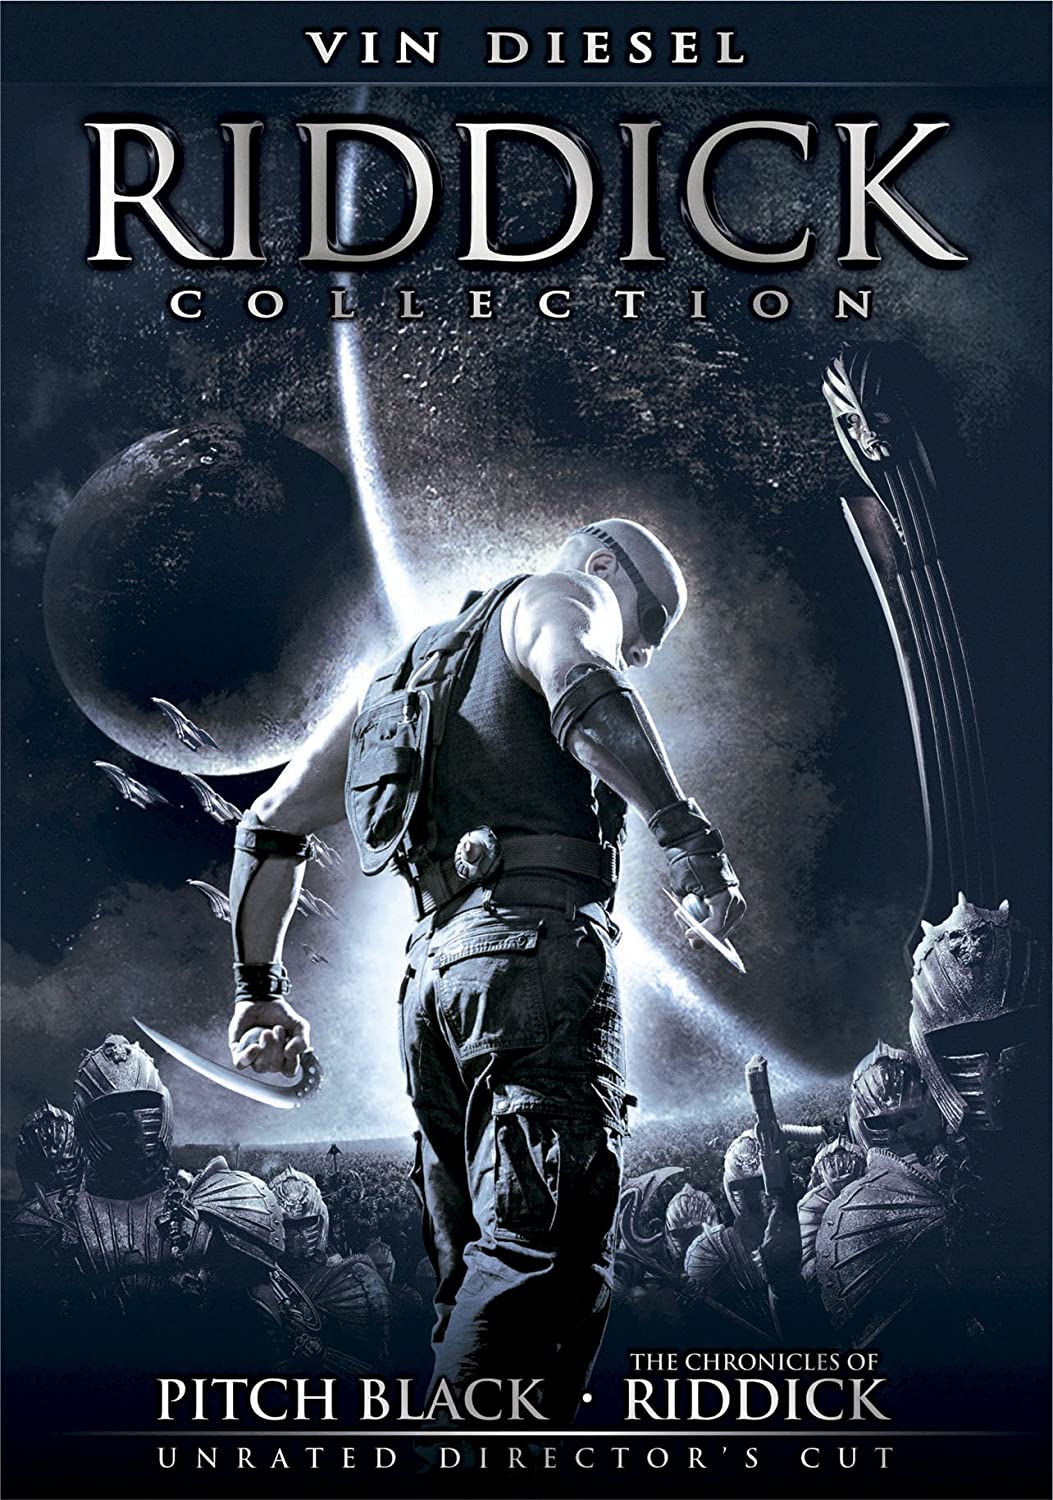 Riddick Collection (Pitch Black / The Chronicles of Riddick / The Chronicles of Riddick: Dark Fury) Fate of the Furious Fandango Cash Version: Vin Diesel, Radha Mitchell, Rhiana Griffith